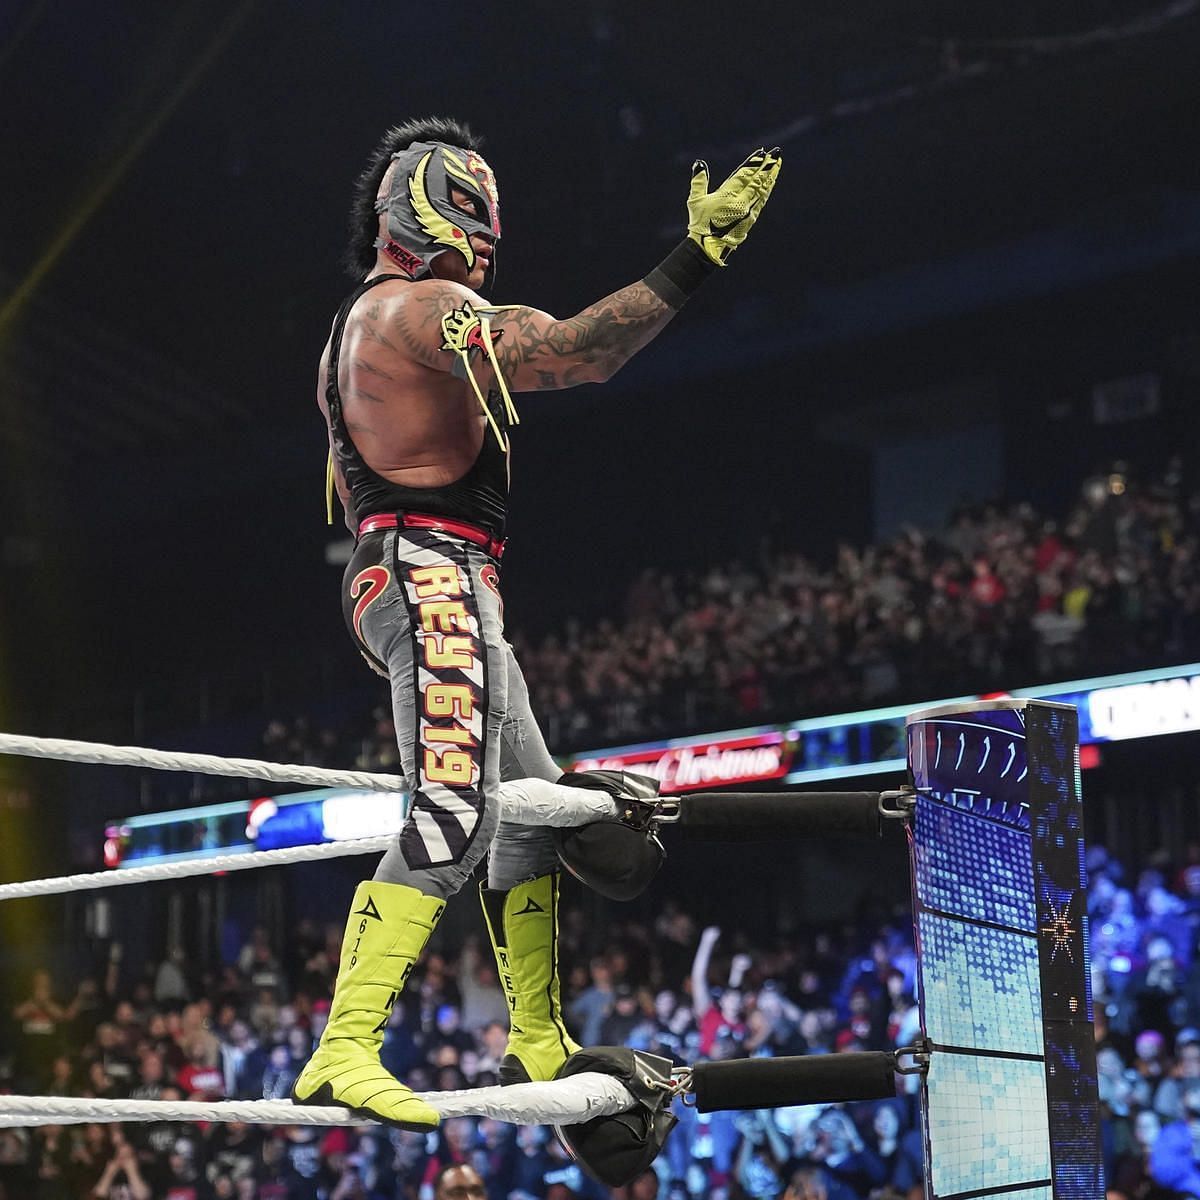 Rey Mysterio looked strong on SmackDown